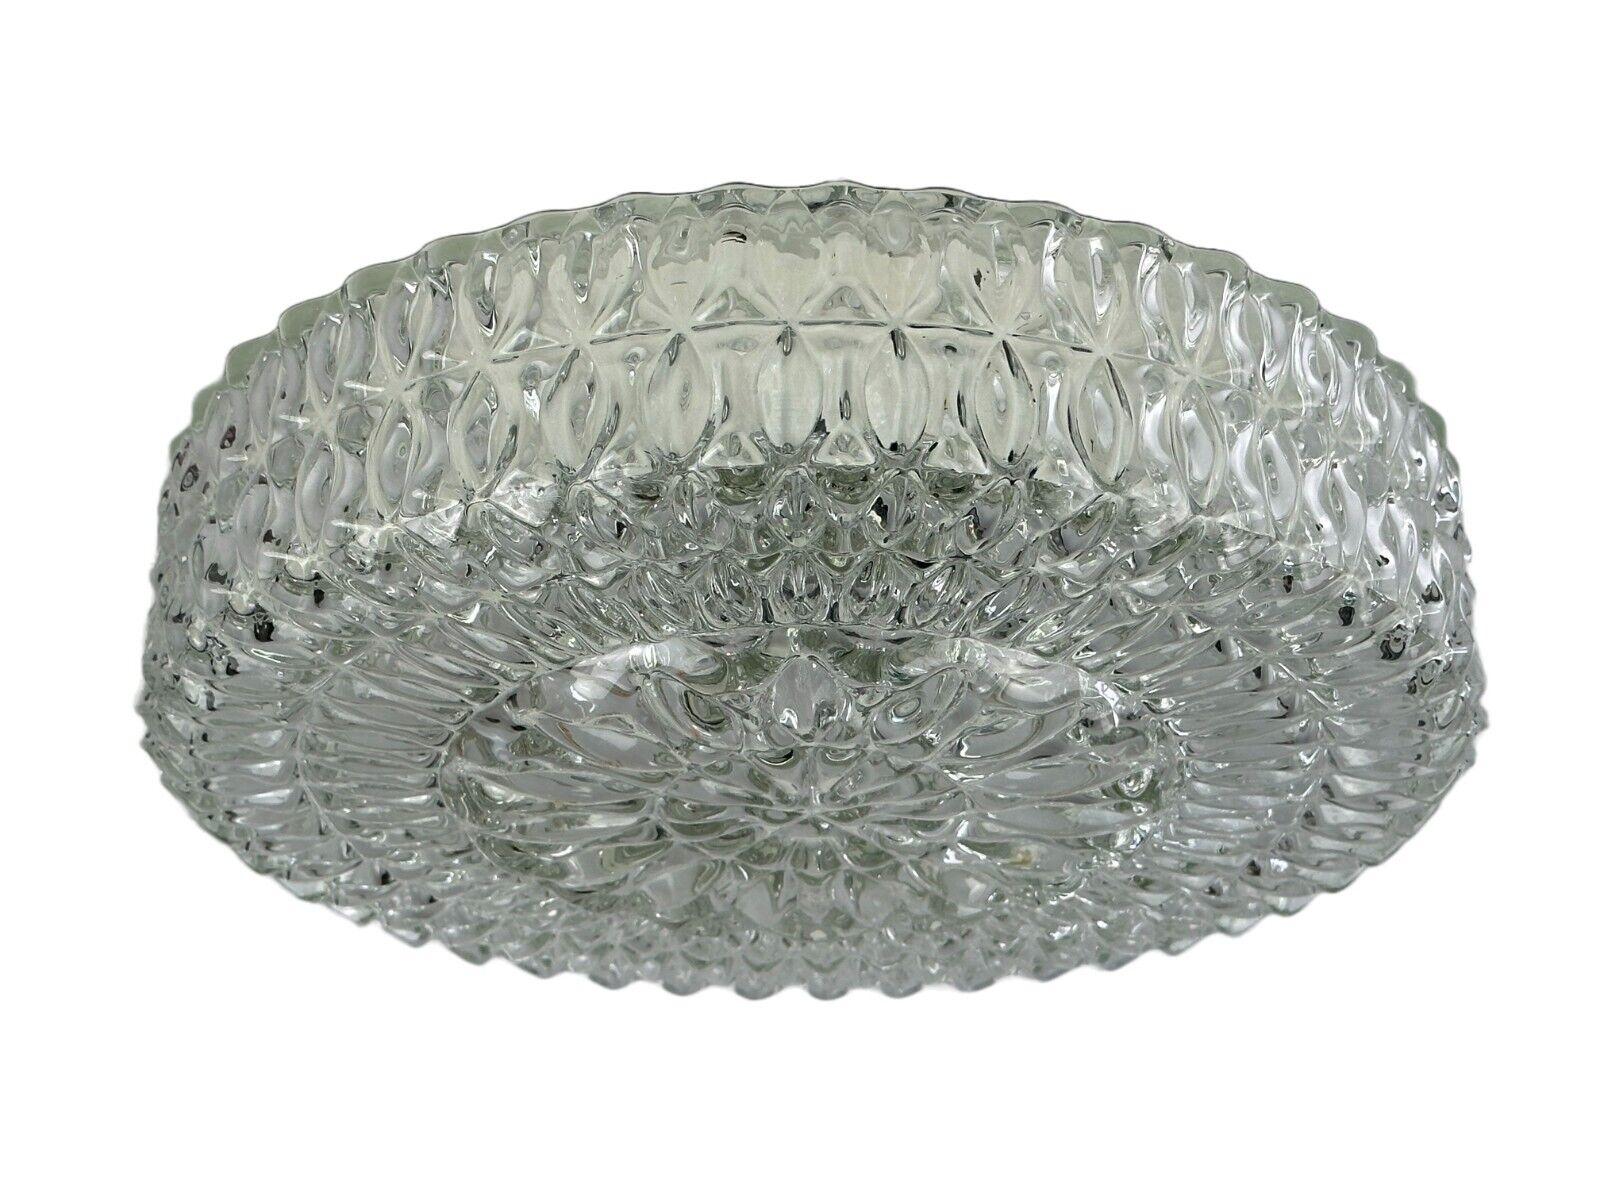 60s 70s ceiling lamp Hustadt Leuchten Germany Plafoniere glass & metal

Object: ceiling lamp

Manufacturer: Hustadt Leuchten

Condition: good

Age: around 1960-1970

Dimensions:

Diameter = 34cm
Height = 11cm

Material: glass, metal

Other